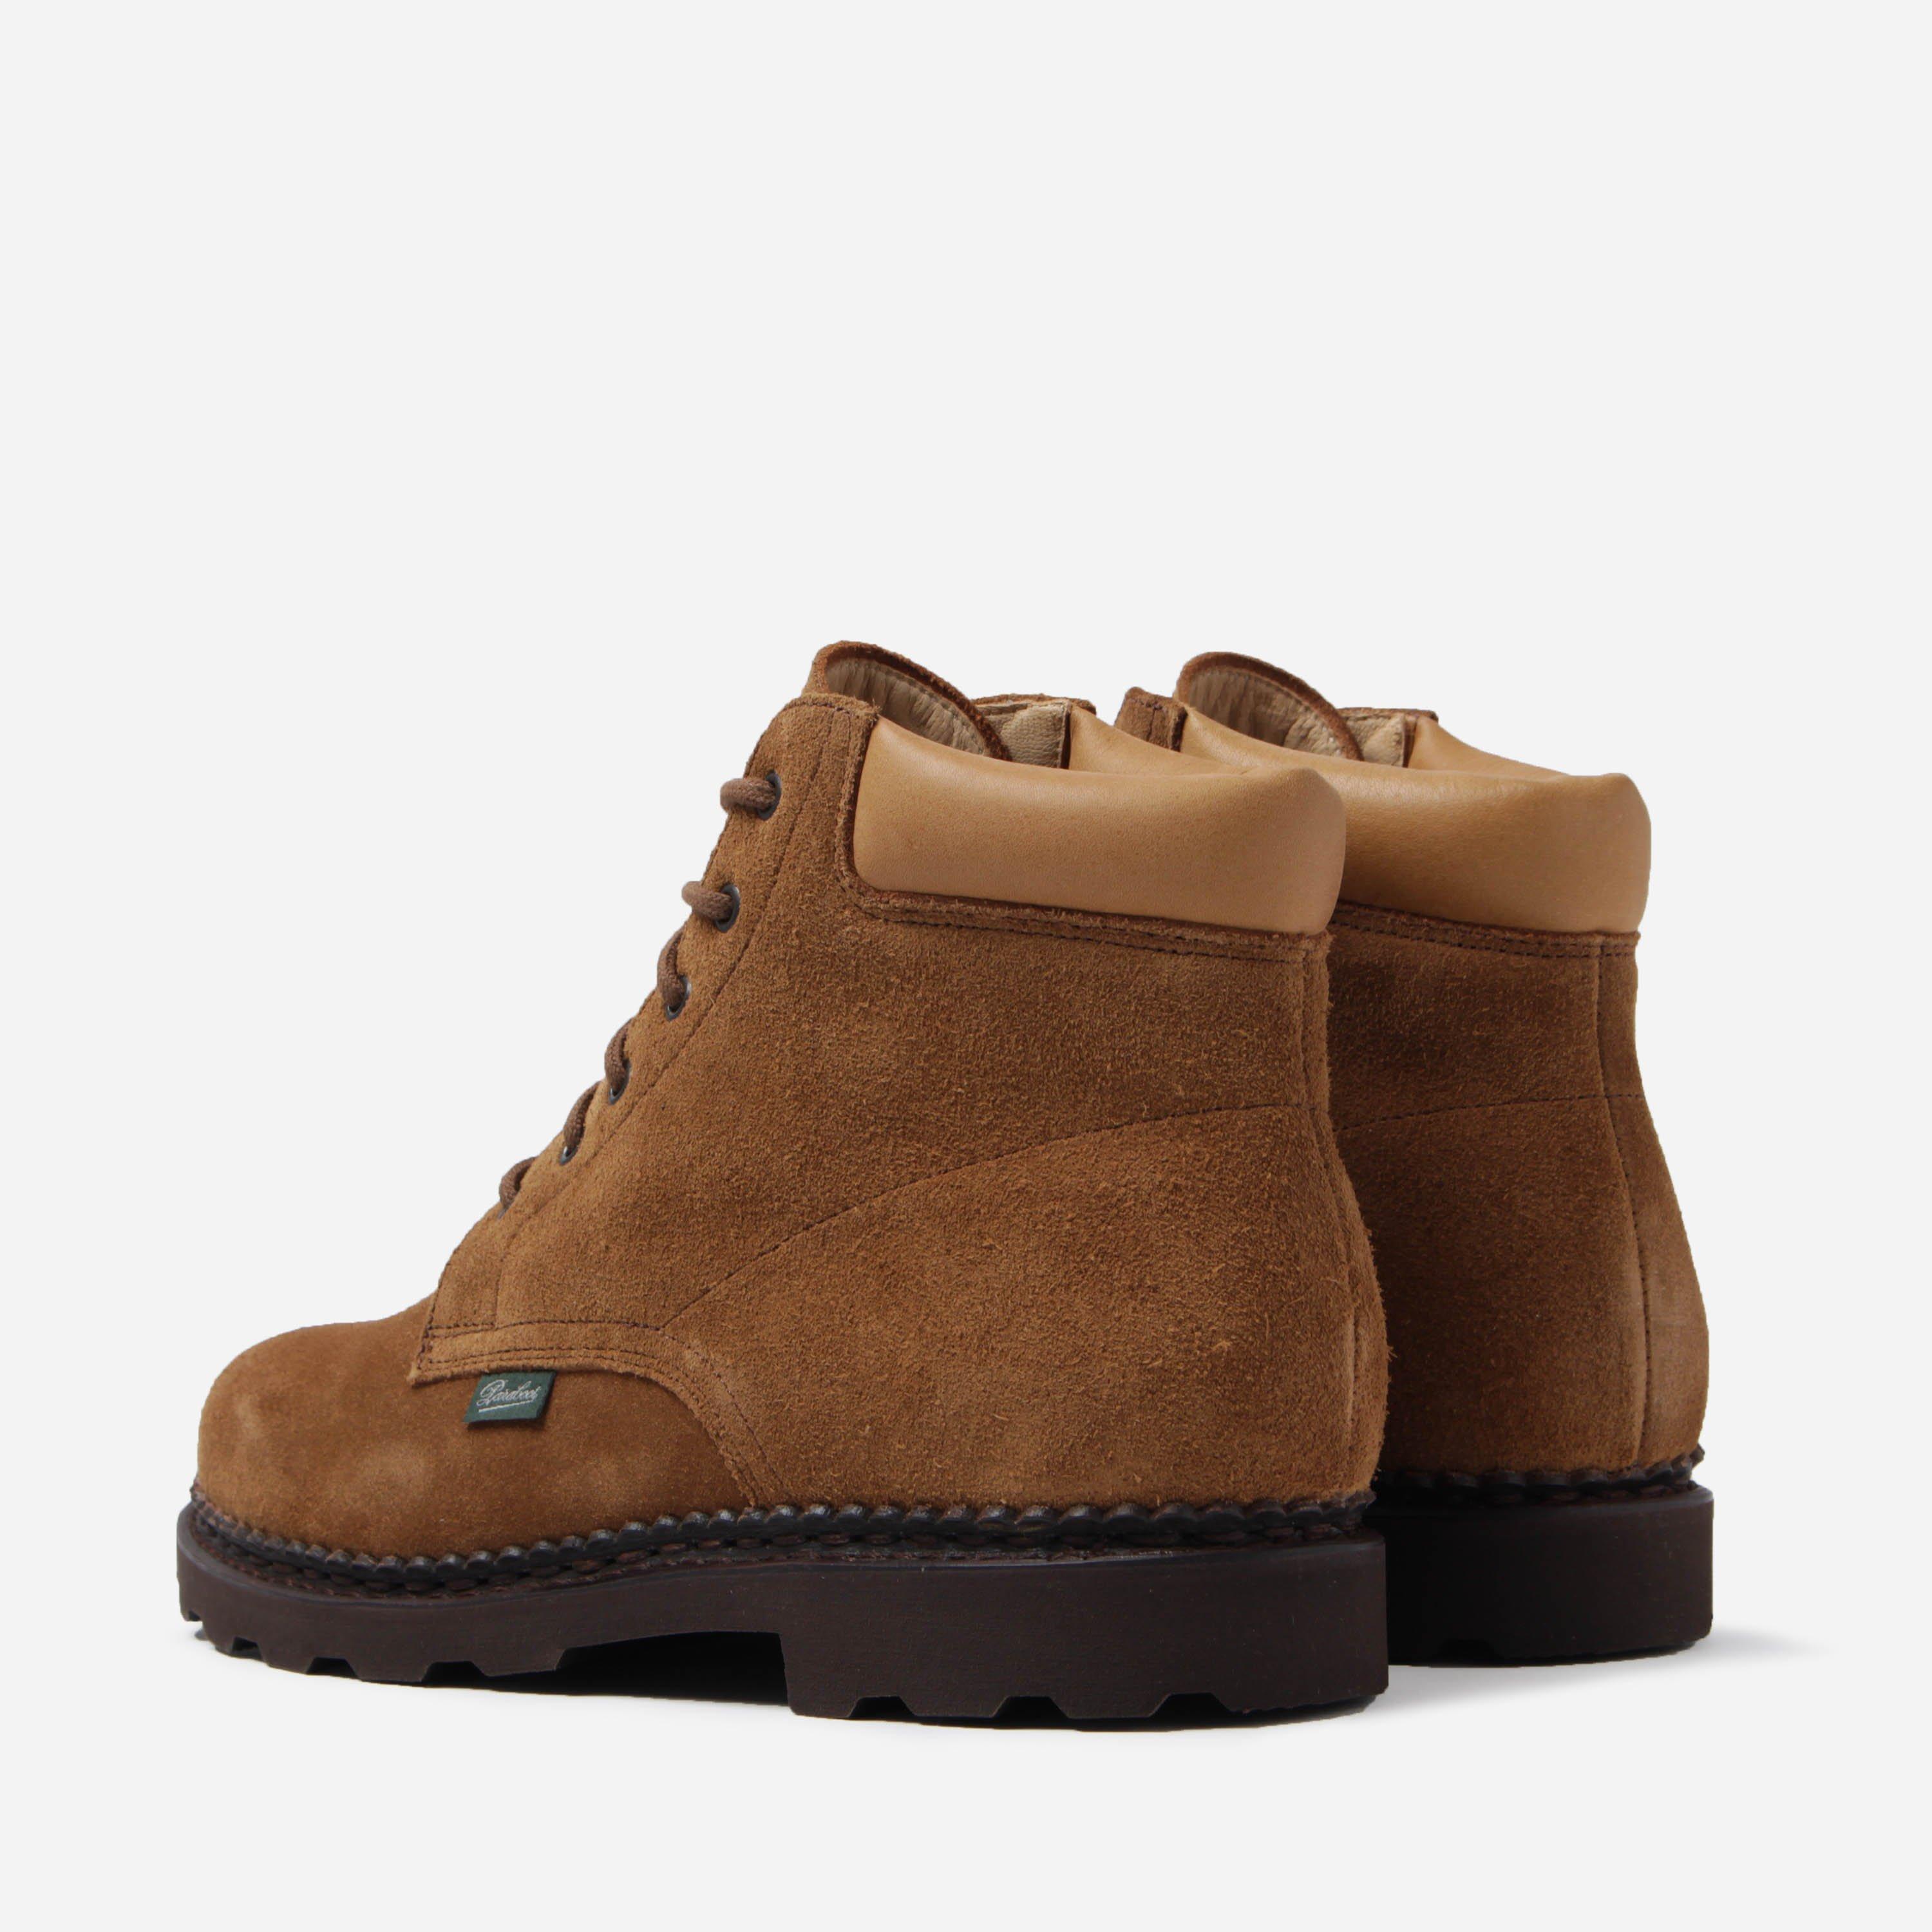 Arpenteur X Paraboot Suede Leather Boot in Brown for Men - Lyst